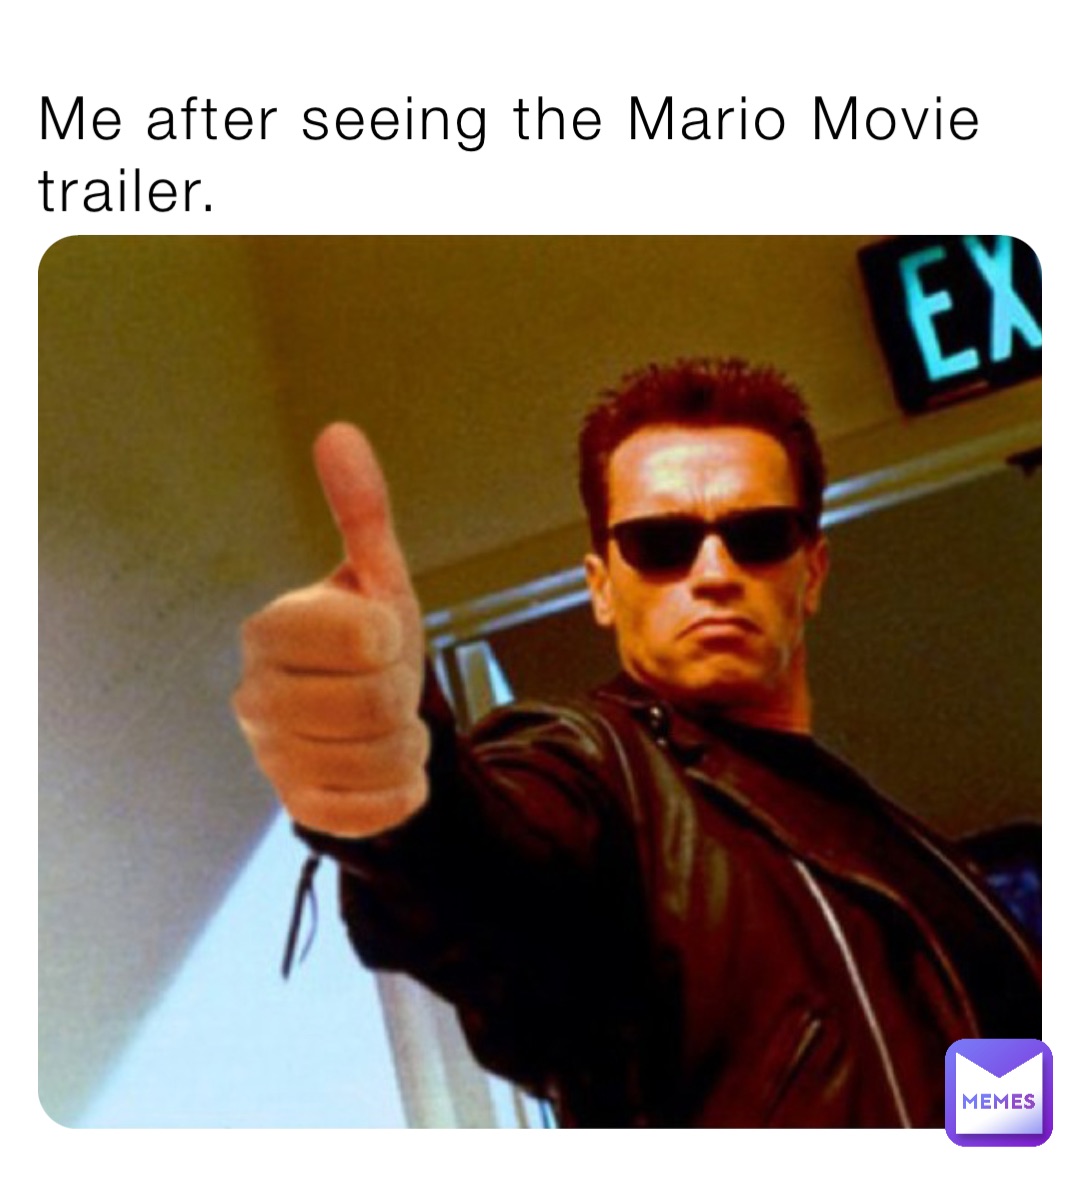 Me after seeing the Mario Movie trailer.